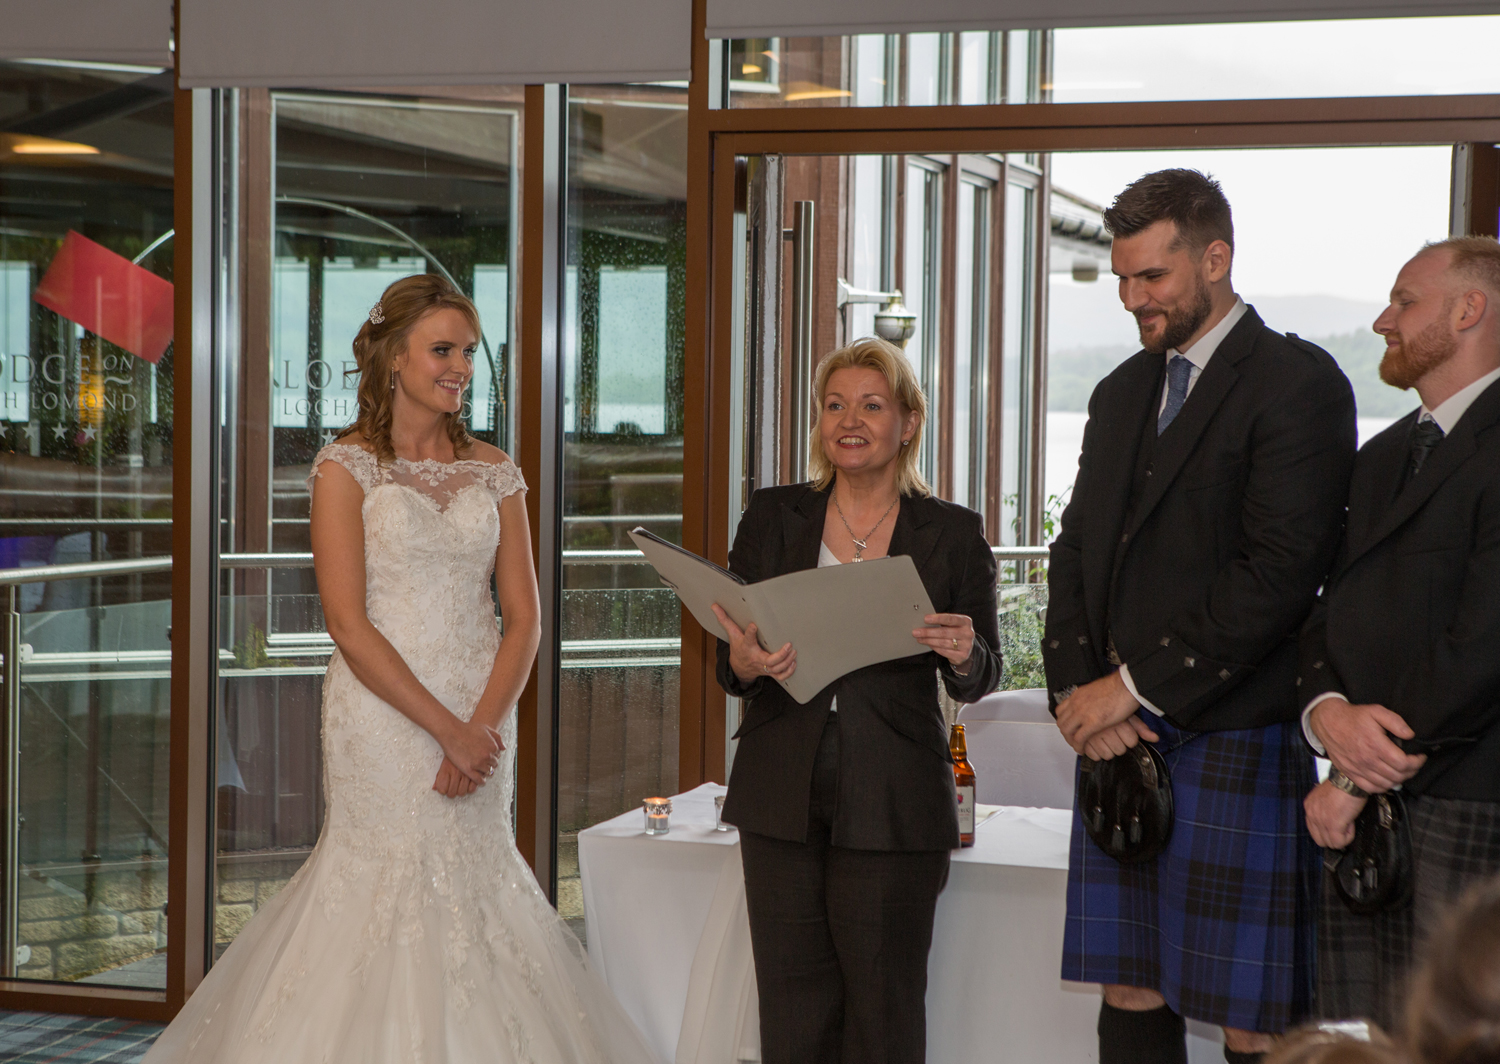 Wedding-photography-Lodge-on-The-Loch-006